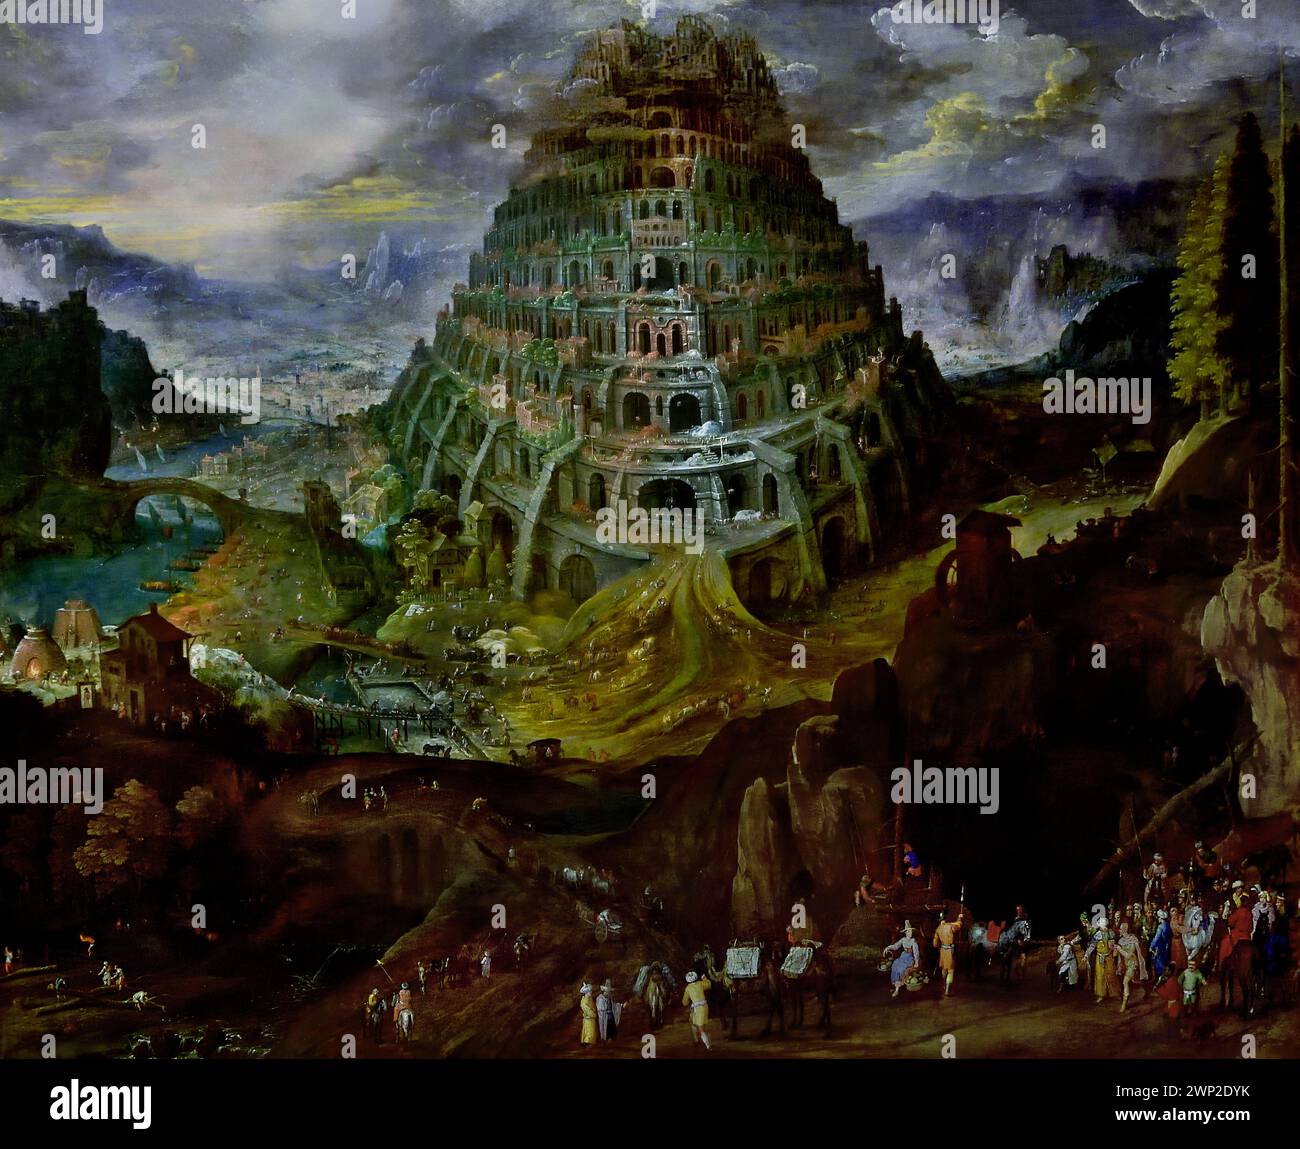 The Tower of Babel by Jan Brueghel I 1565-1625 and Tobias Verhaecht 1561-1631  Royal Museum of Fine Arts,  Antwerp, Belgium, Belgian ( Tower of Babel, According to Genesis, the Babylonians wanted to make a name for themselves by building a mighty city and a tower “with its top in the heavens.” God disrupted the work by so confusing the language of the workers that they could no longer understand one another.). Stock Photo